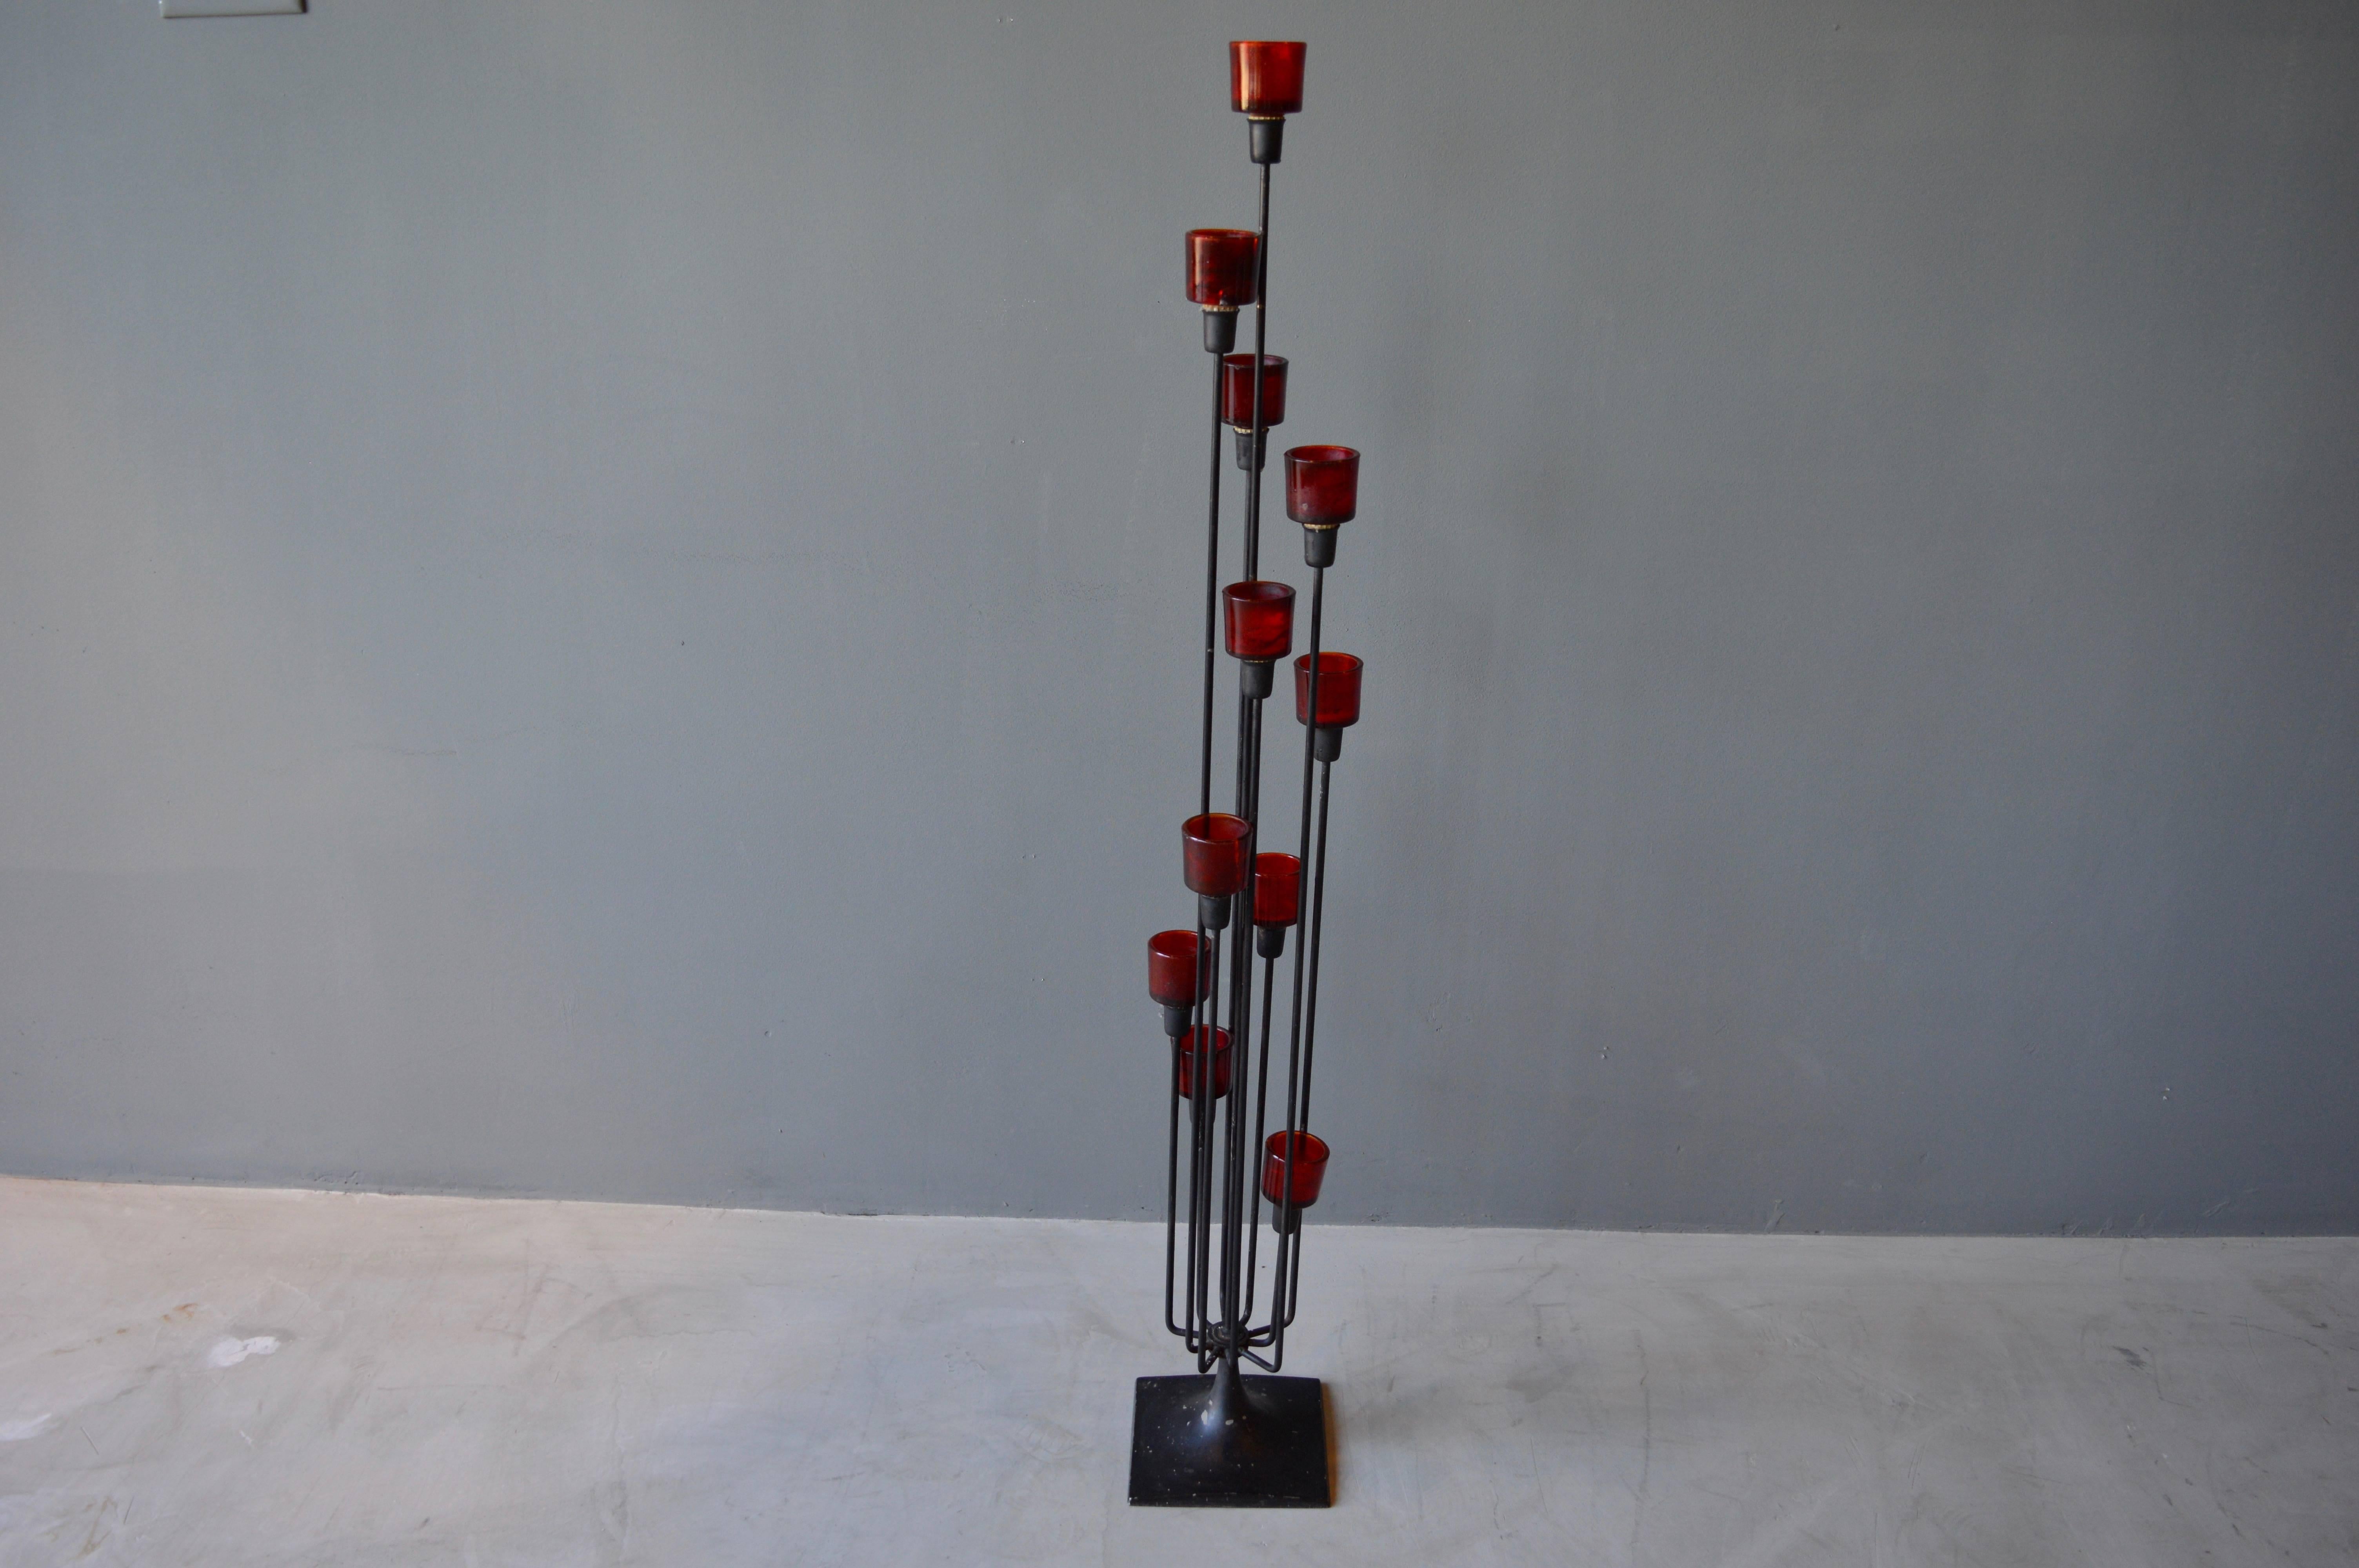 Excellent iron floor candelabra with 11 arms. Red glass candleholders are removable. Great scale. Good vintage condition.